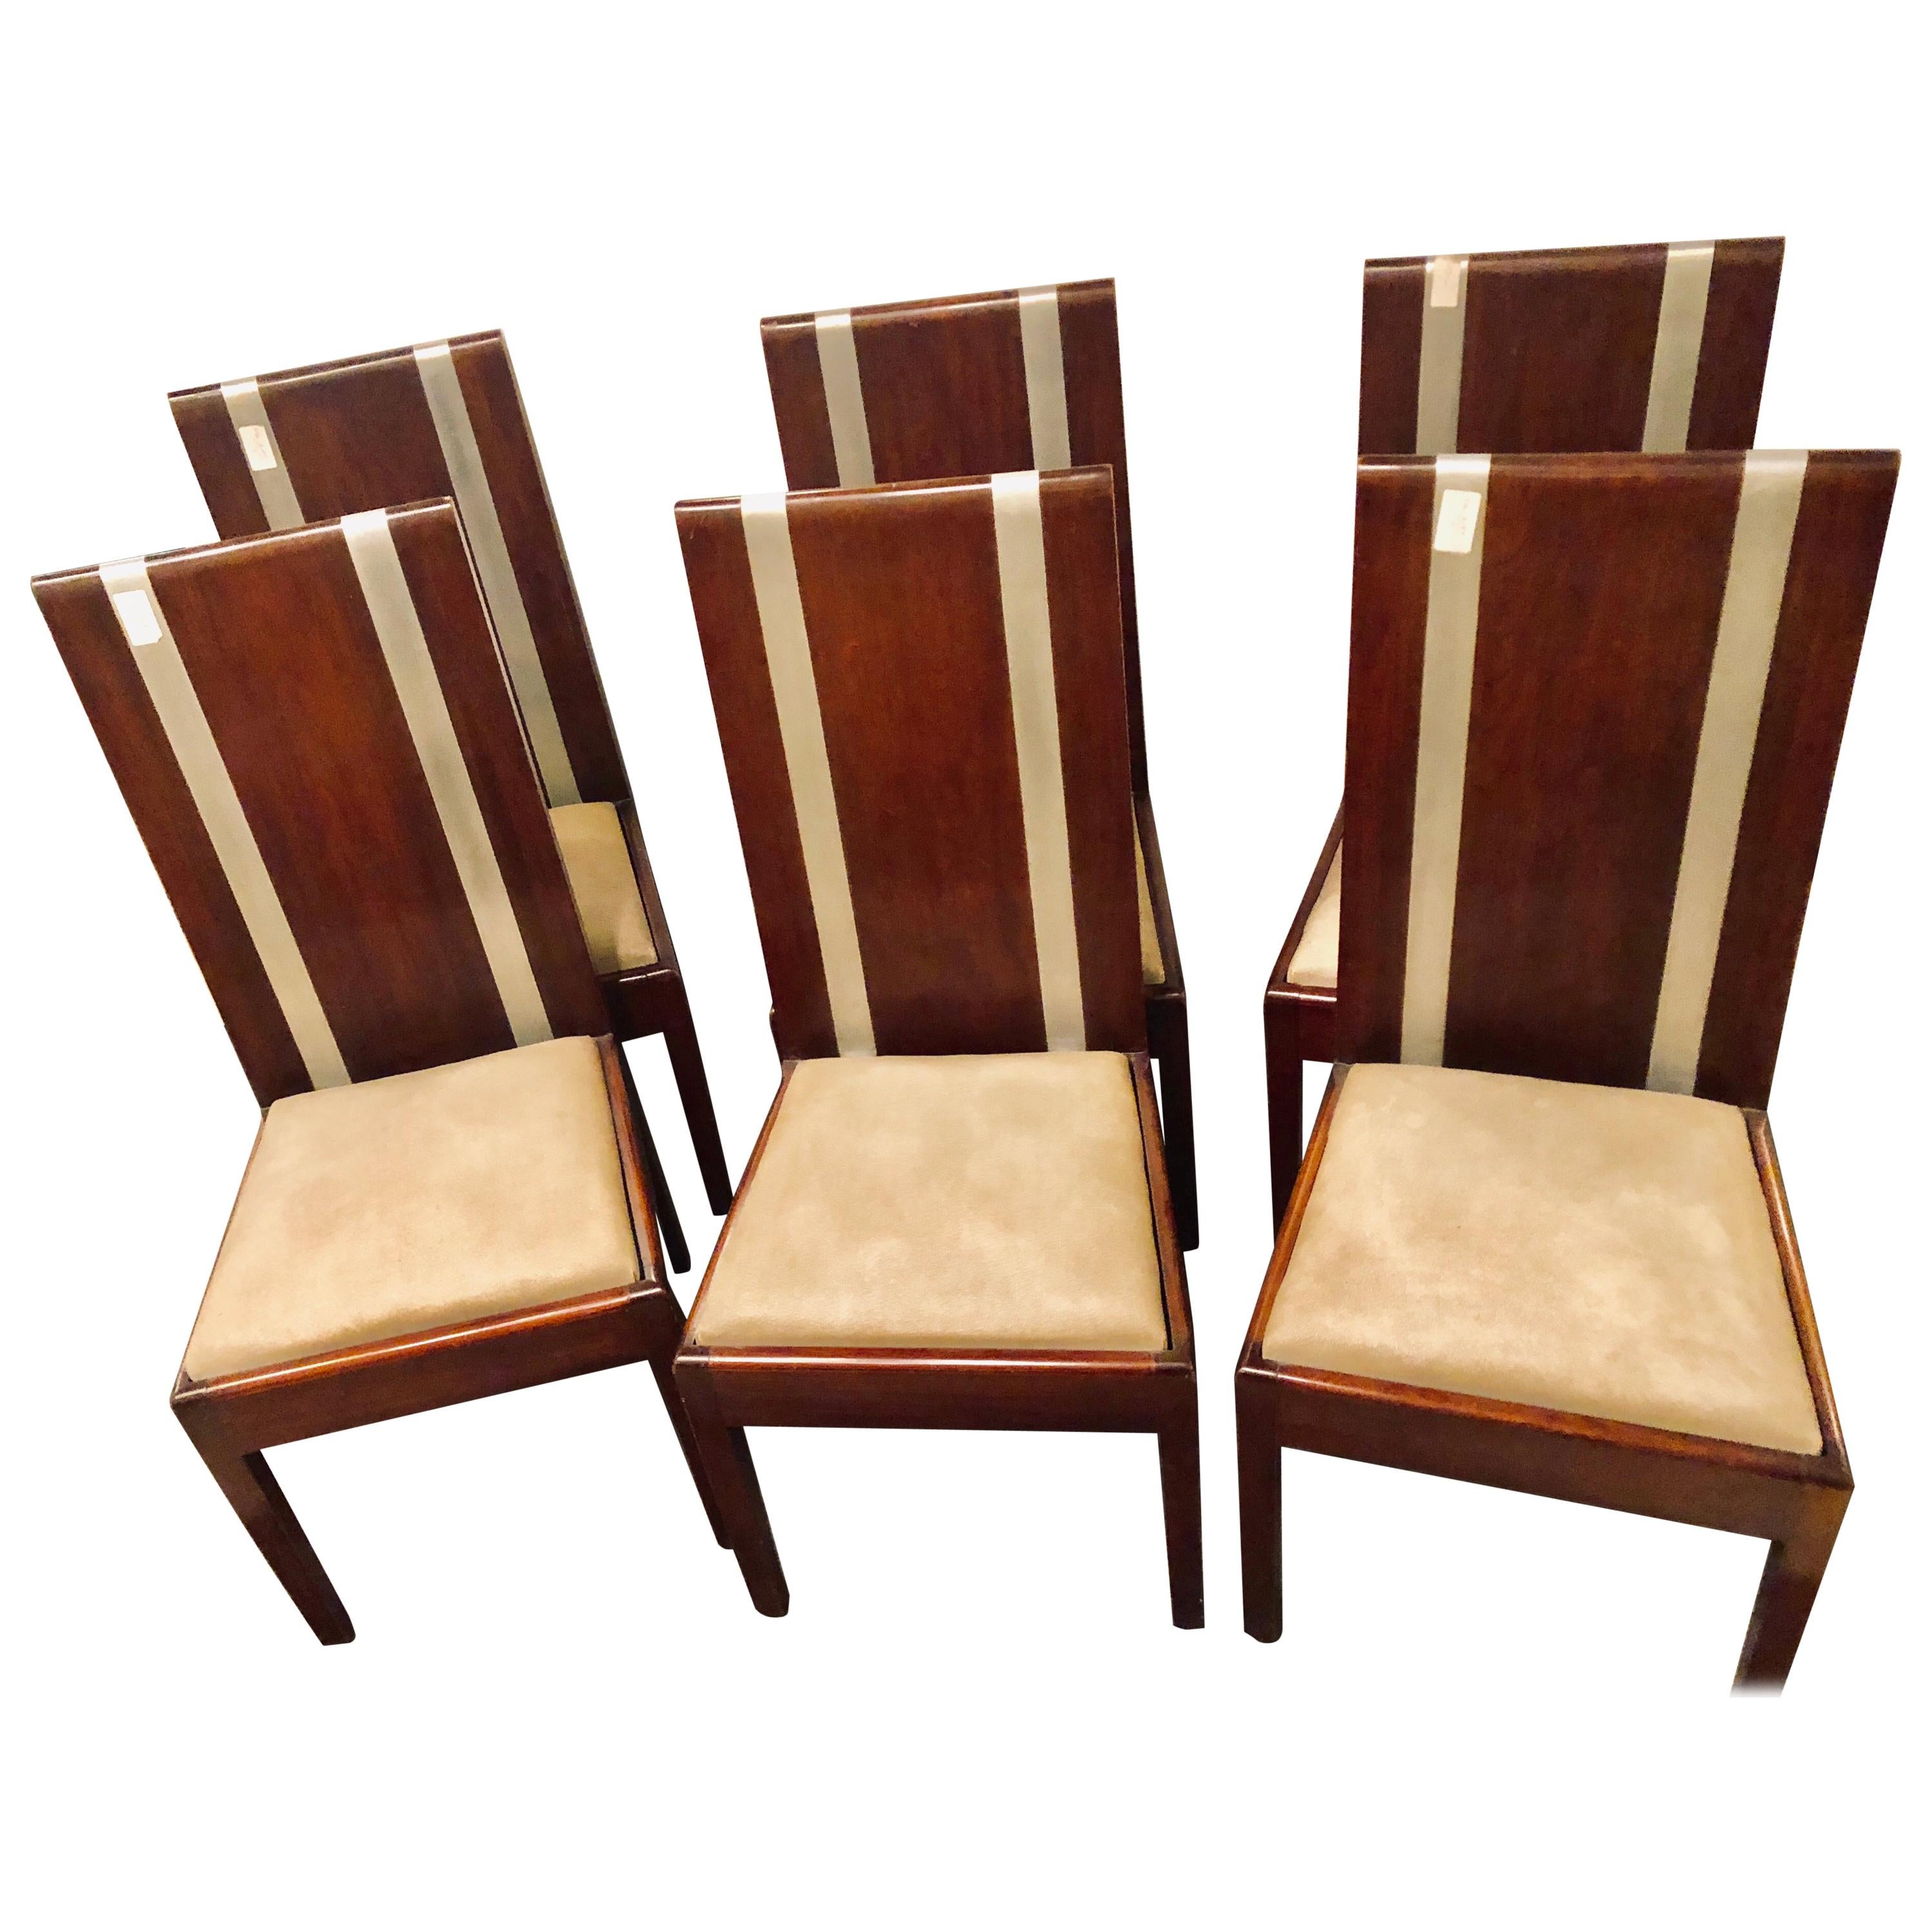 Six Mid-Century Modern or Art Deco Dining Chairs in the Manner of Jean M. Frank